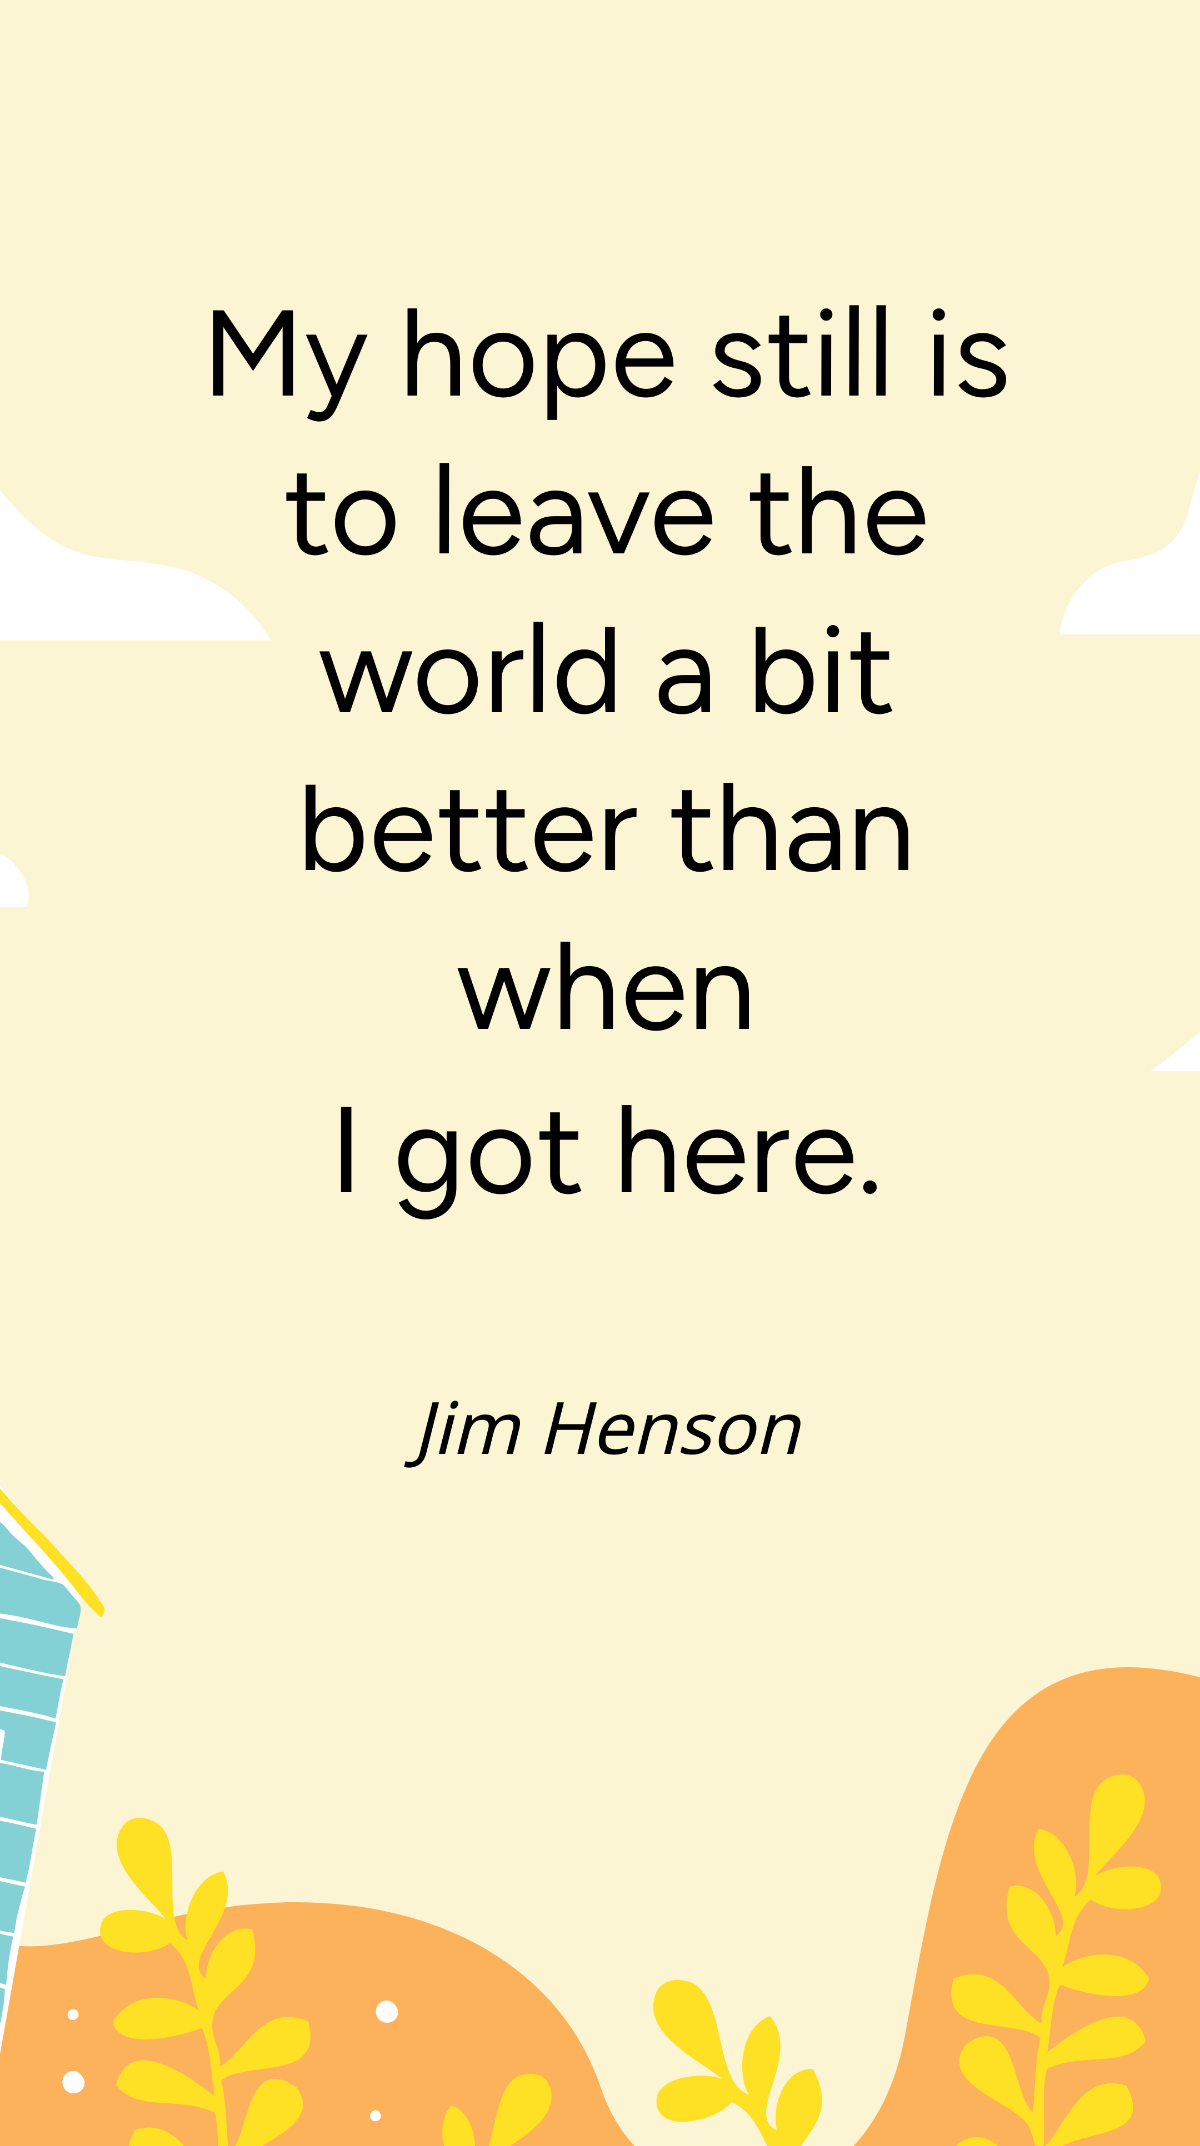 Jim Henson - My hope still is to leave the world a bit better than when I got here. Template